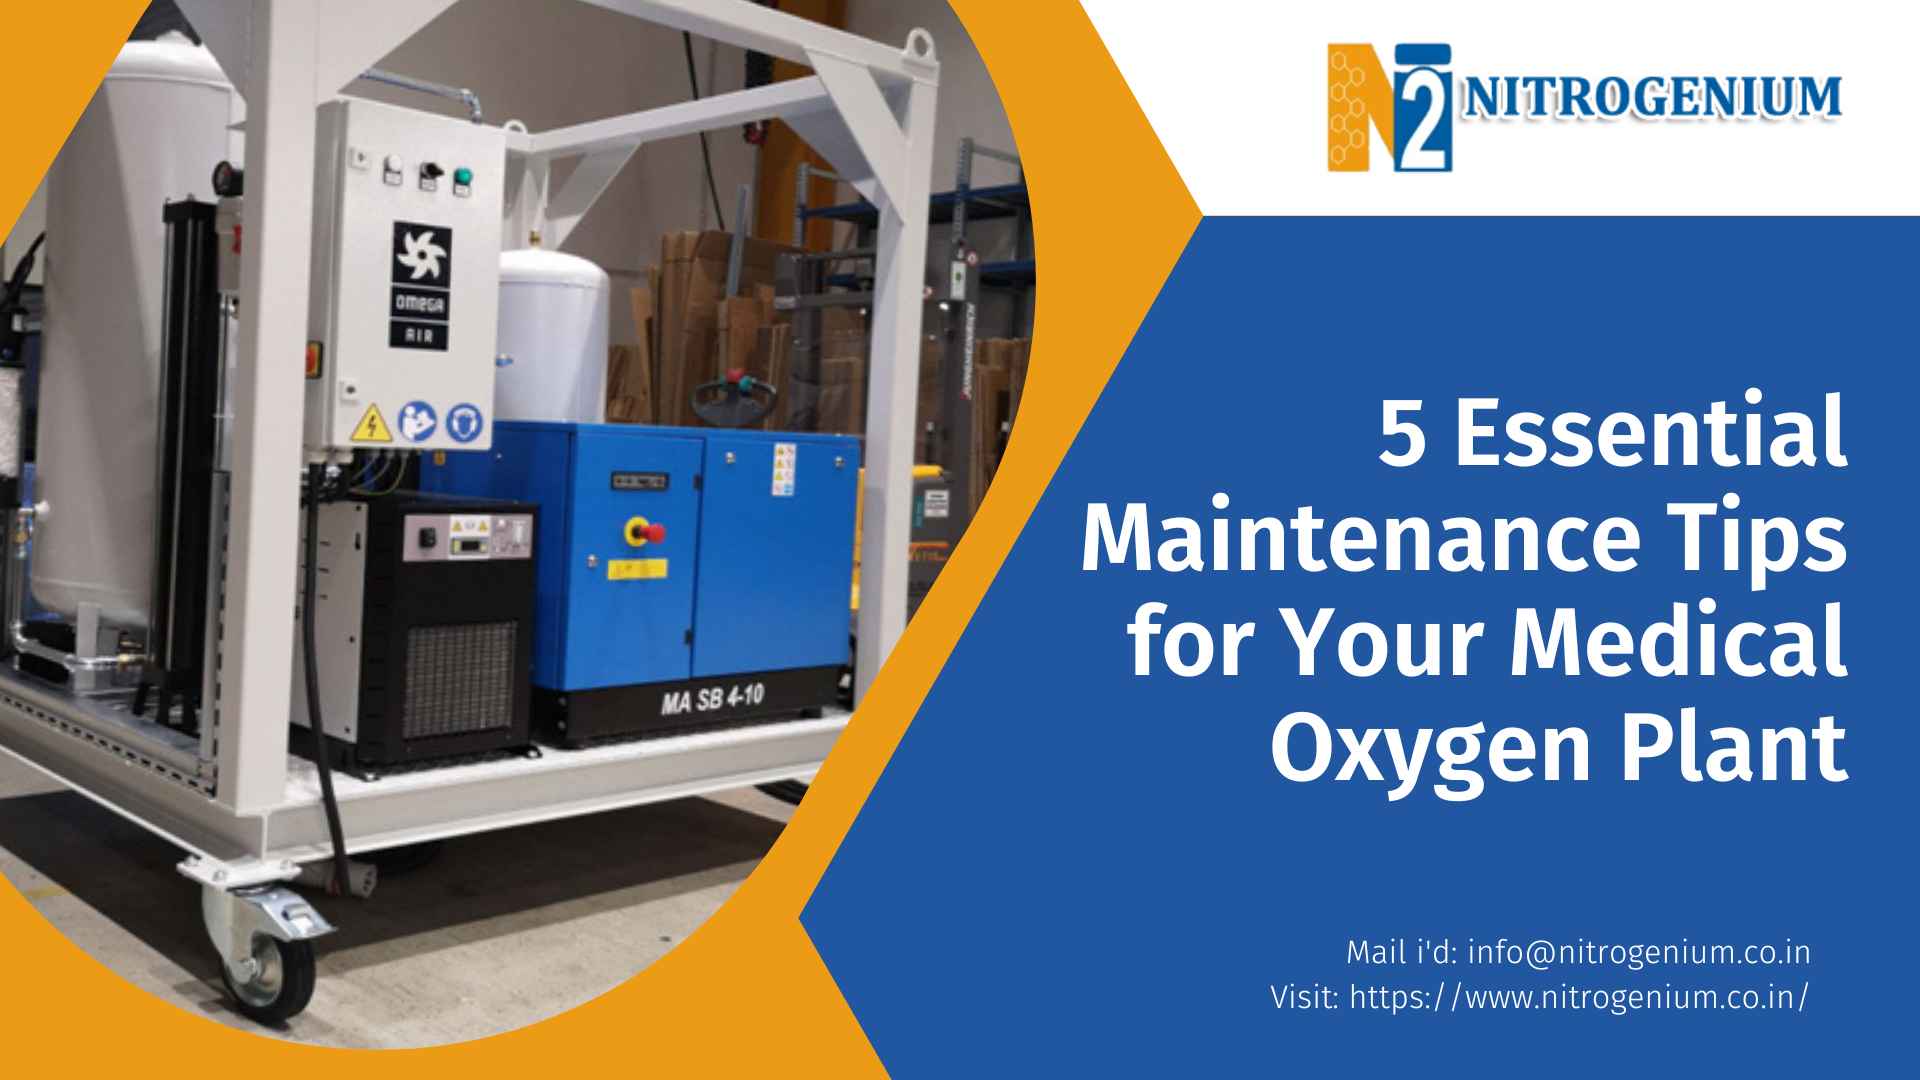 5 Essential Maintenance Tips for Your Medical Oxygen Plant